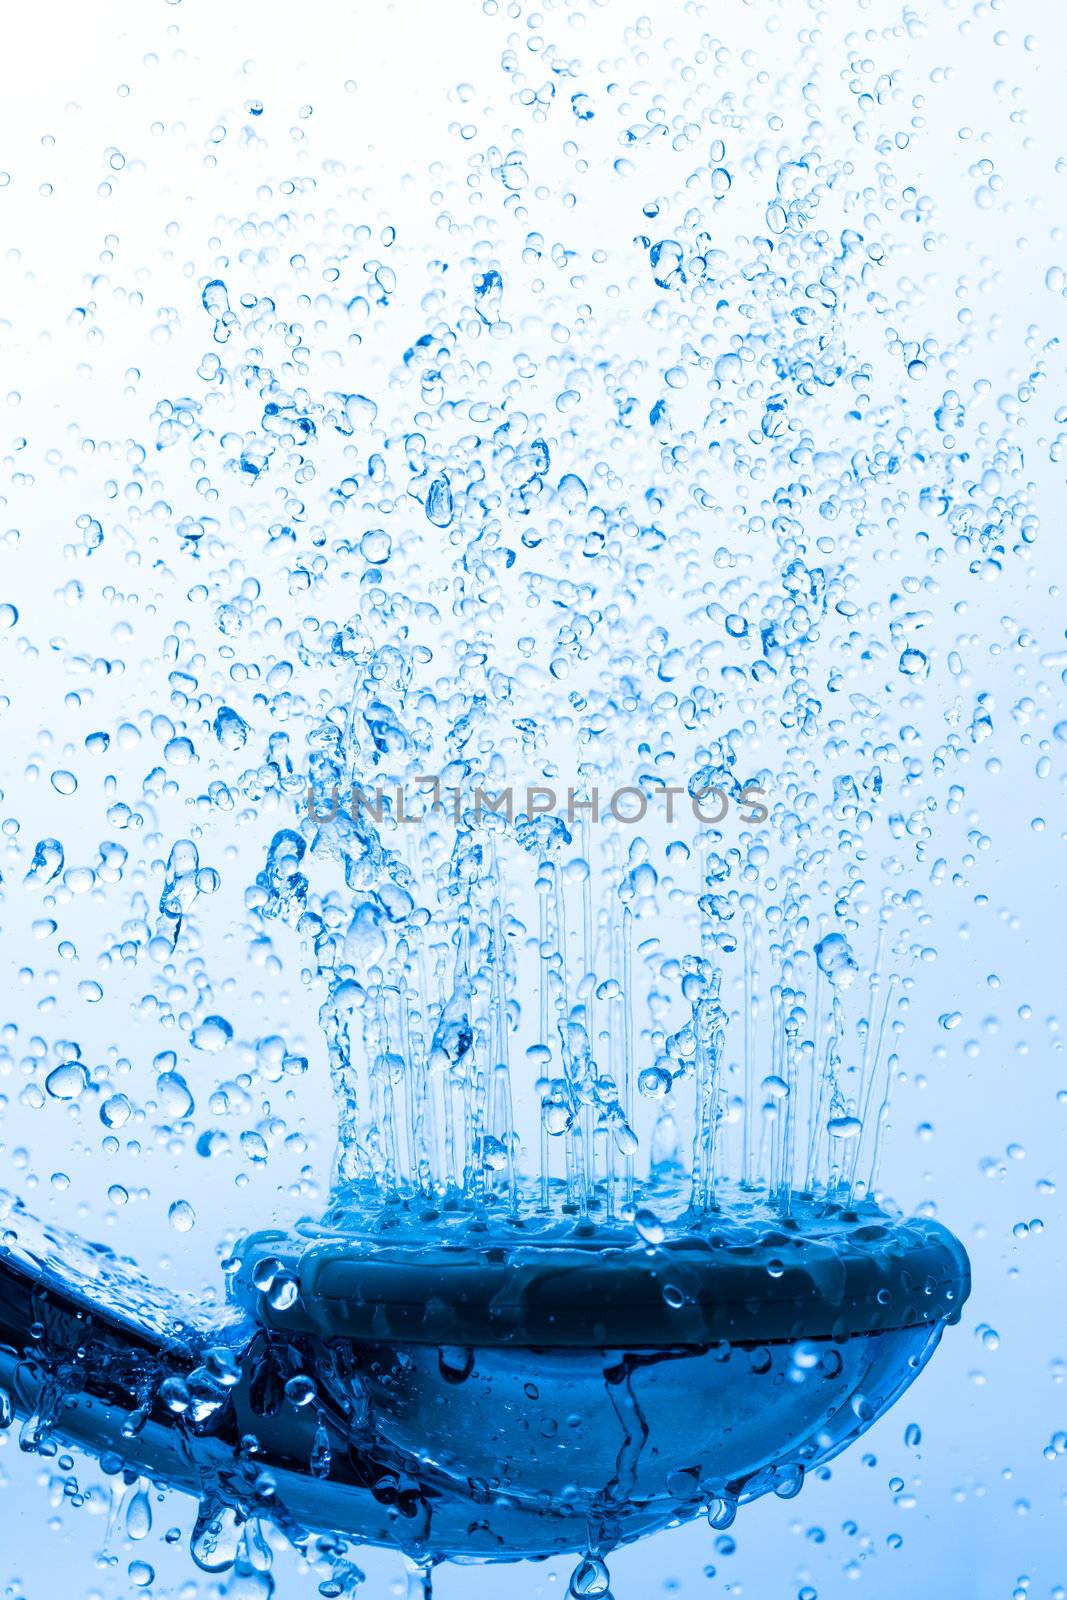 Shower Head with Running Water by Discovod